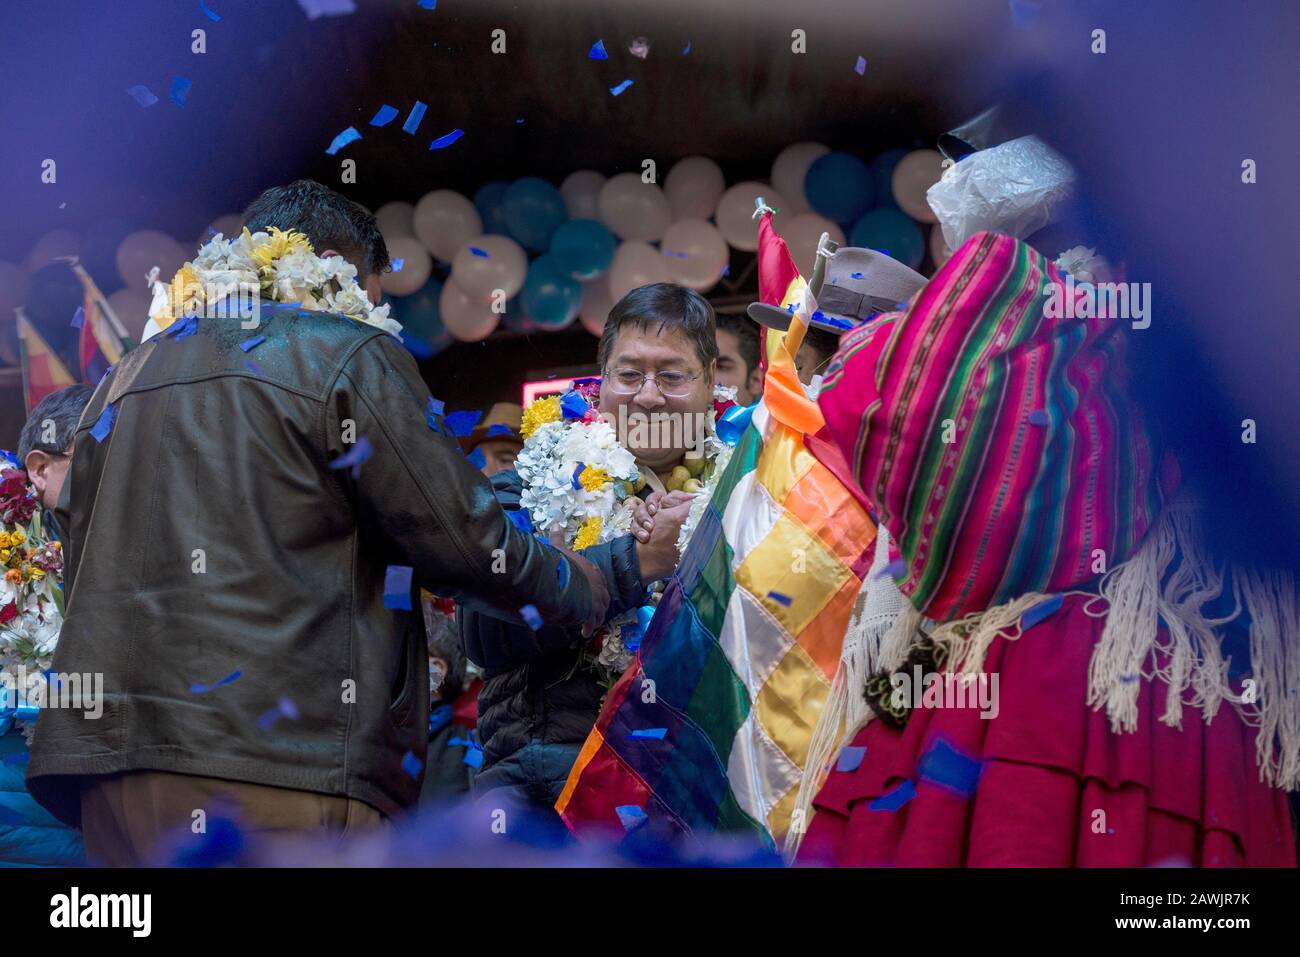 08 February 2020, Bolivia, El Alto: The presidential candidate Luis Arce of the party Movimiento al Socialismo (MAS) welcomes his supporters and shakes their hands. The new election on 3 May comes more than six months after the presidential election in October, which was overshadowed by accusations of manipulation and from which Morales emerged as the winner. Photo: Ivan Perez/dpa Stock Photo